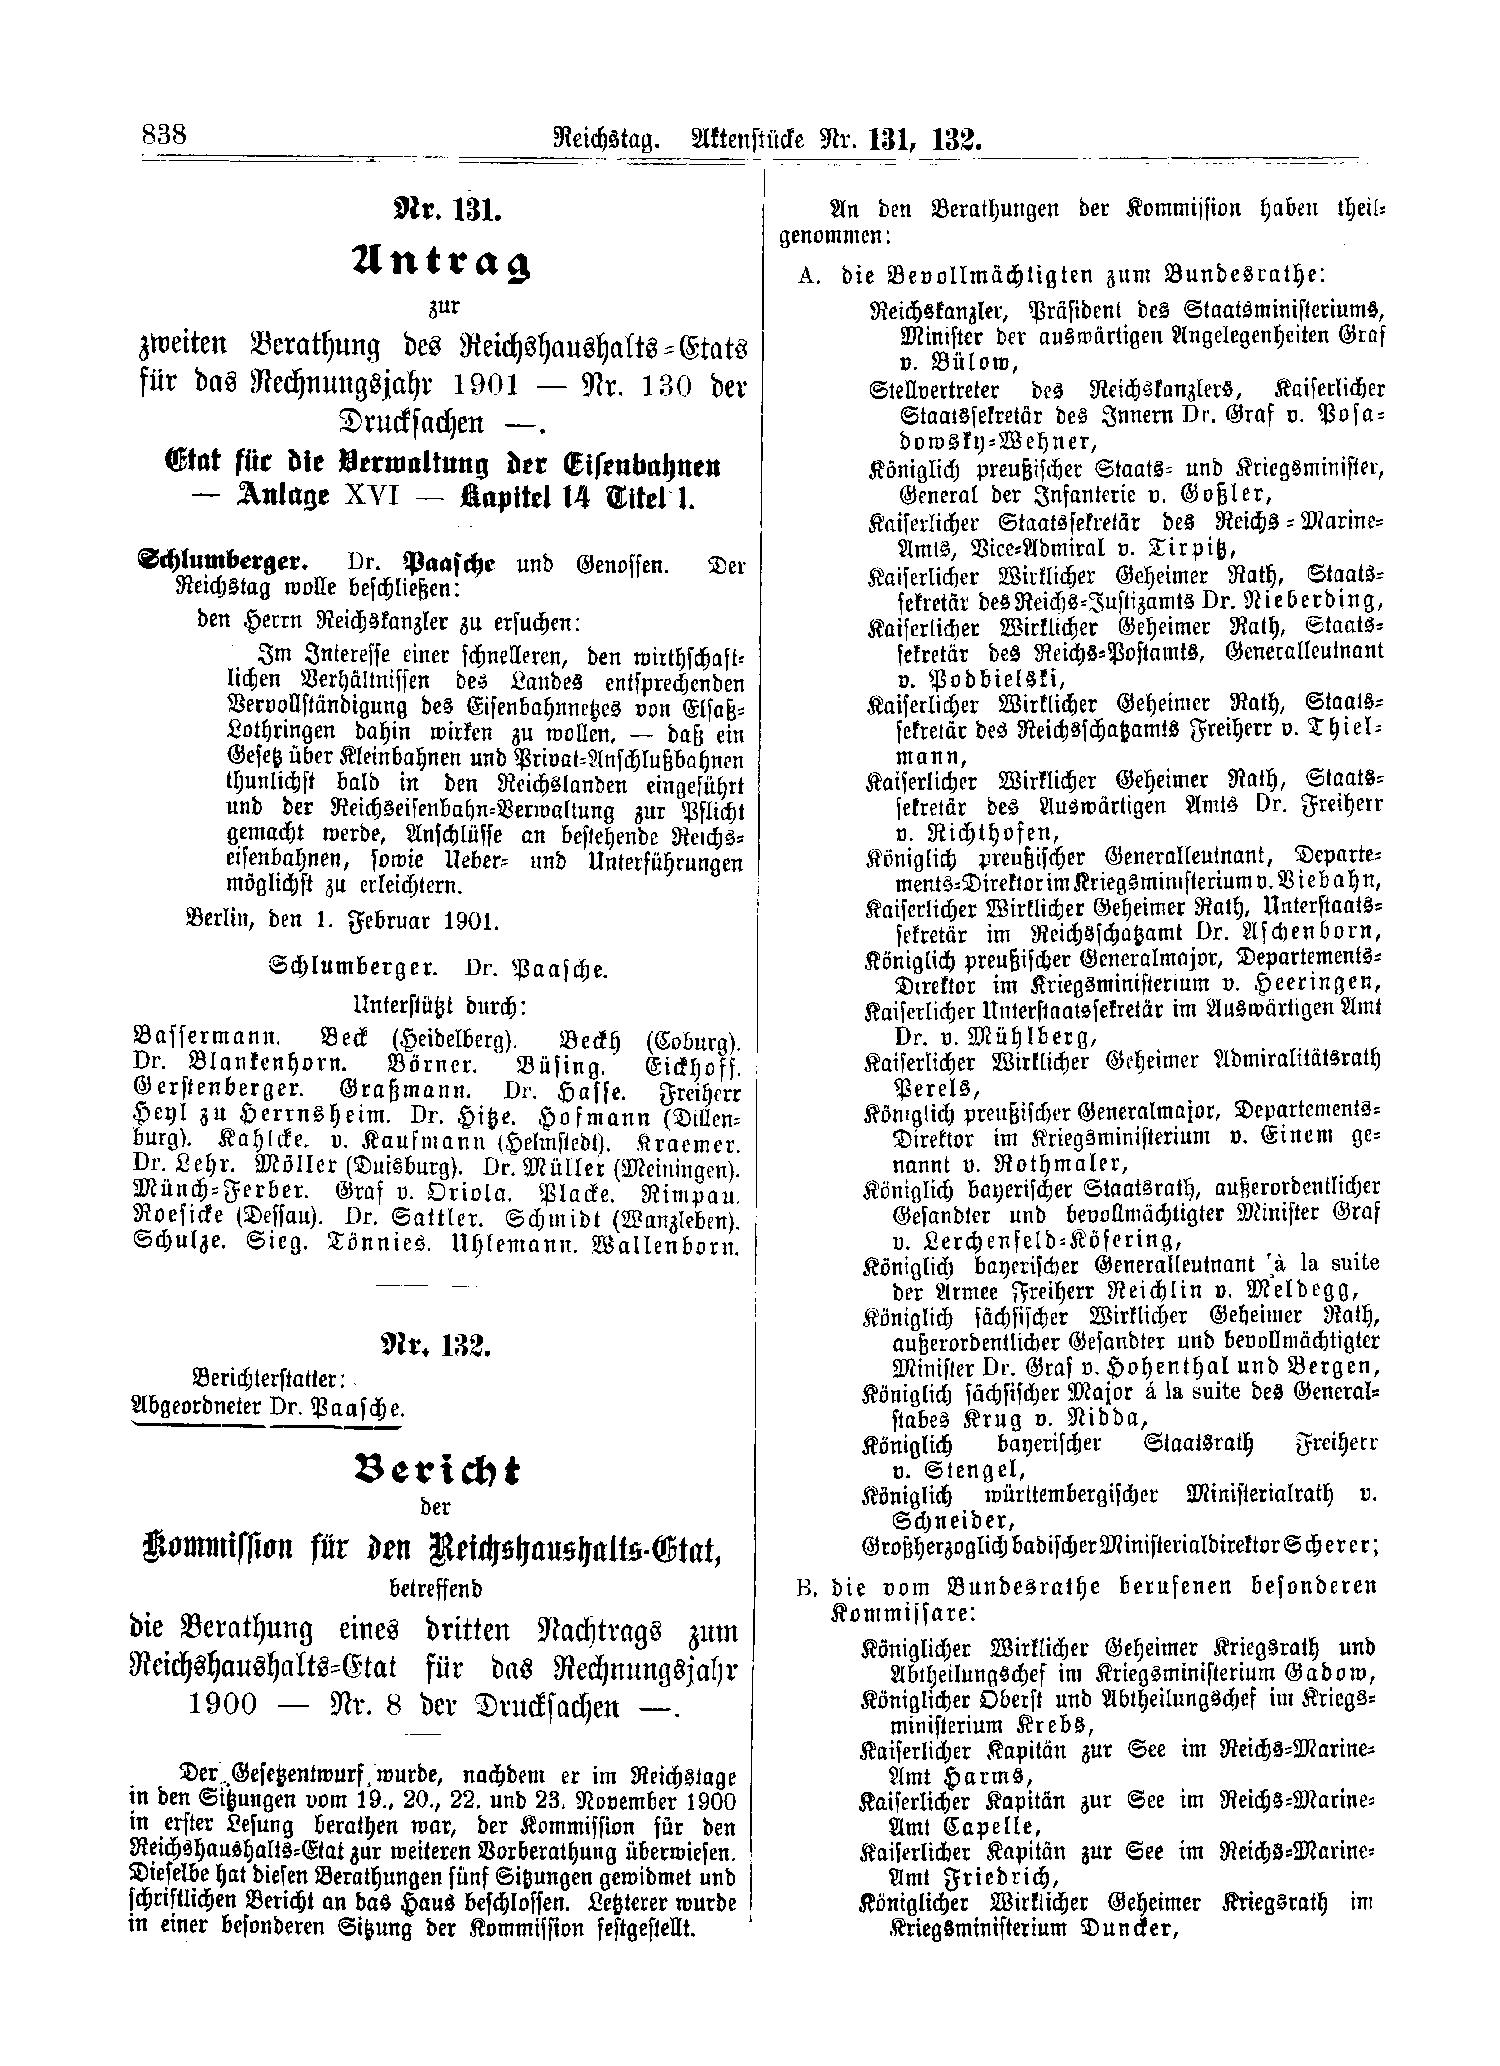 Scan of page 838